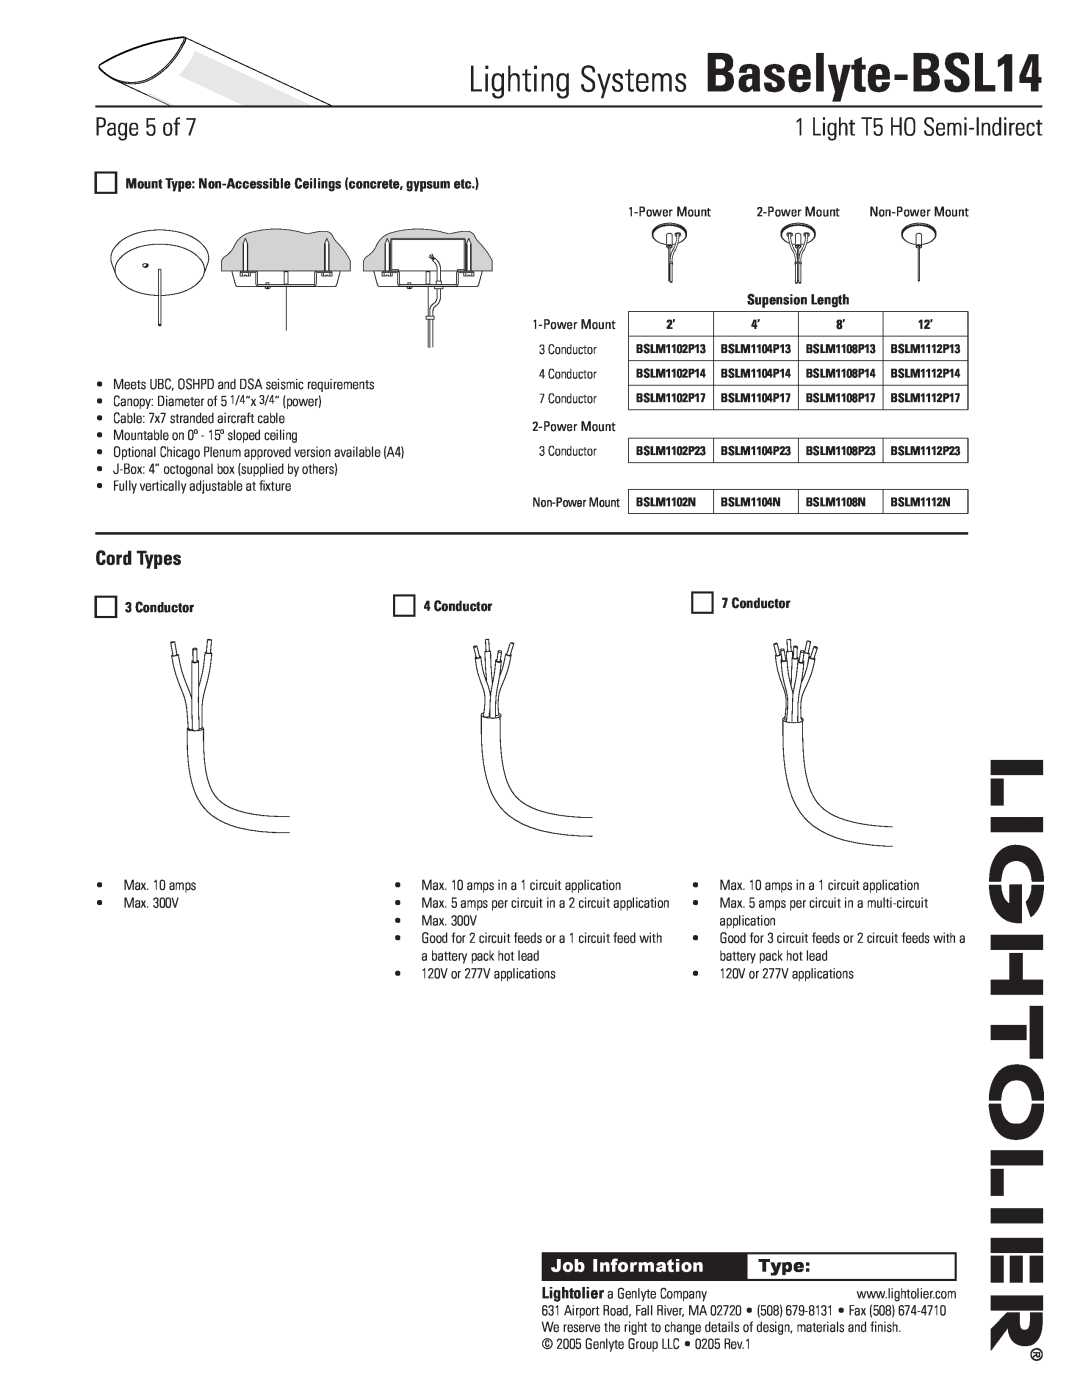 Lightolier Cord Types, Conductor, Lighting Systems Baselyte-BSL14, Page of, Light T5 HO Semi-Indirect, Job Information 